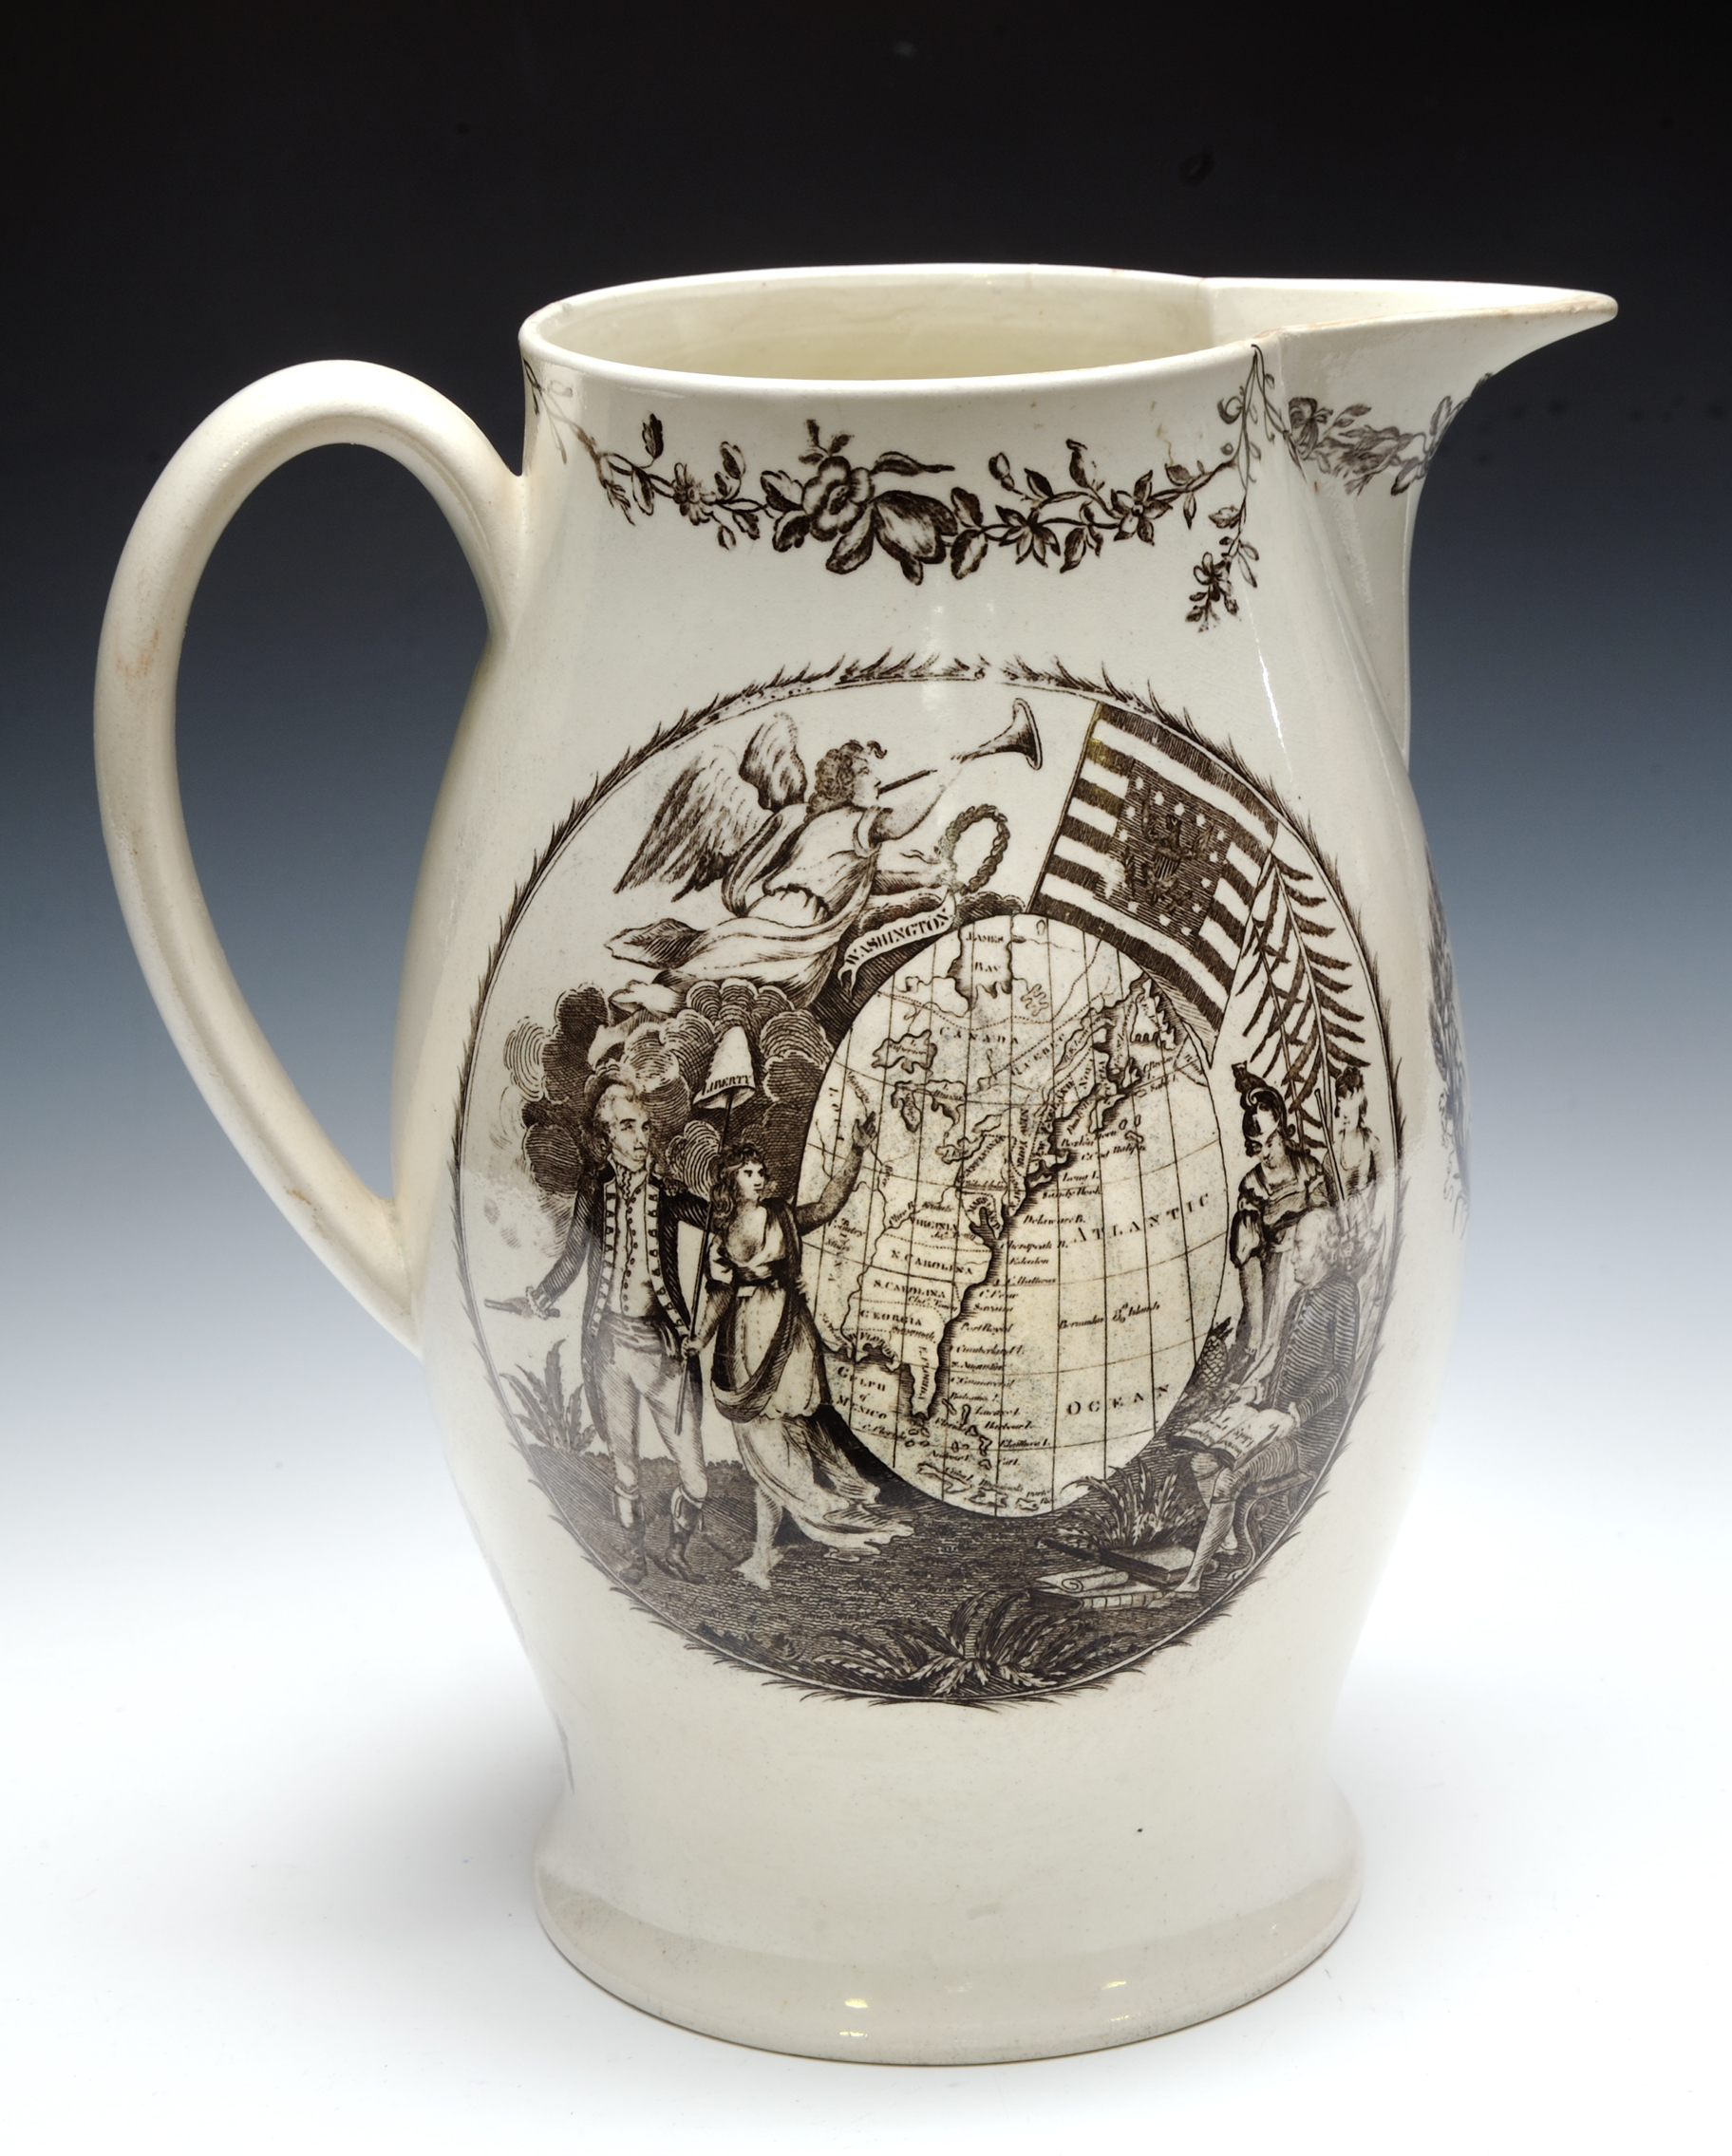 Jug with a map of the United States of America, ca. 1800